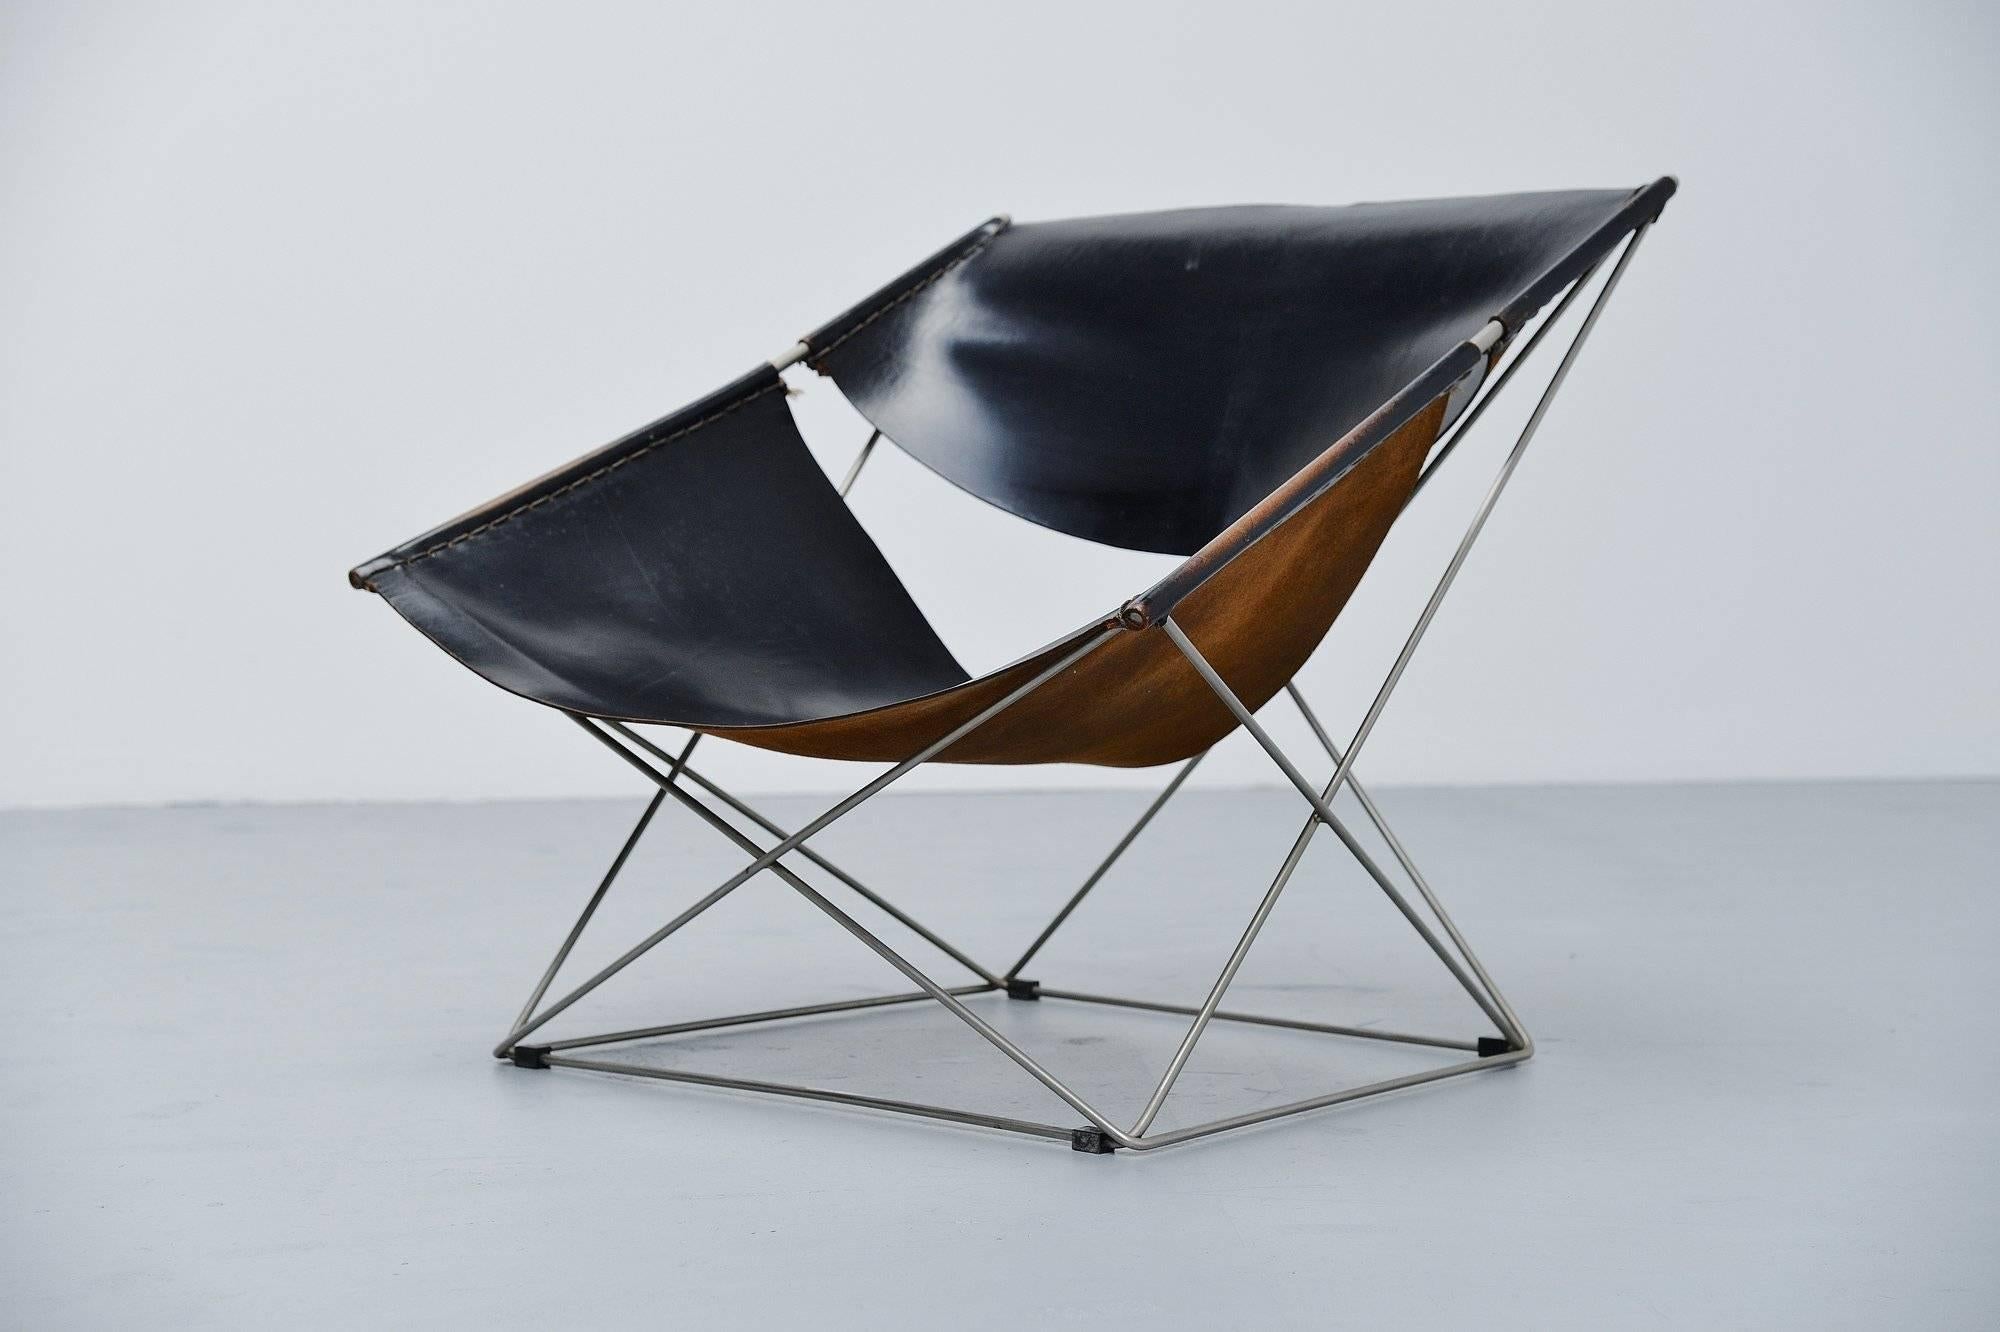 Iconic so called 'butterfly' chair model F675 designed by Pierre Paulin and manufactured by Artifort, Holland, 1963. This is one of the nicest 'light weighted' lounge chairs that Paulin designed. The chair has a nickel plated solid steel frame and a